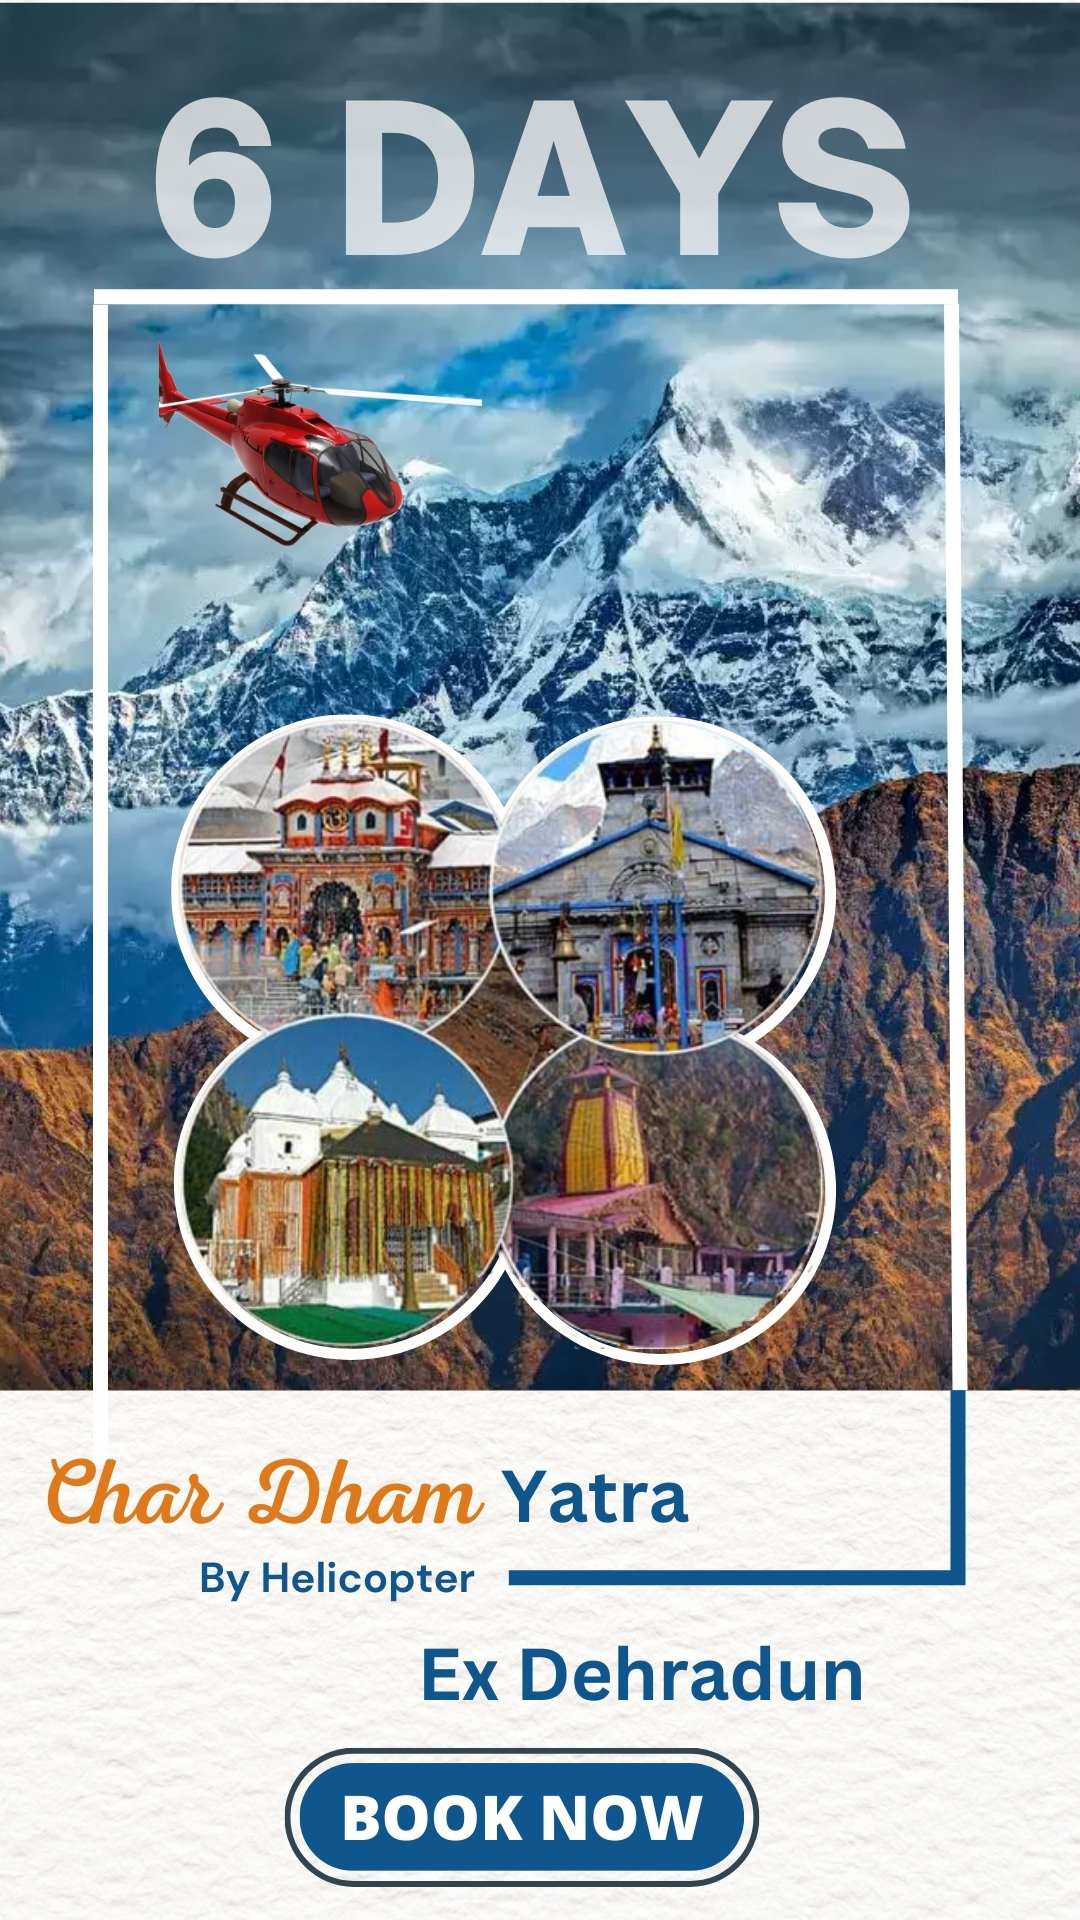 Dham Yatra by Helicopter -6 days